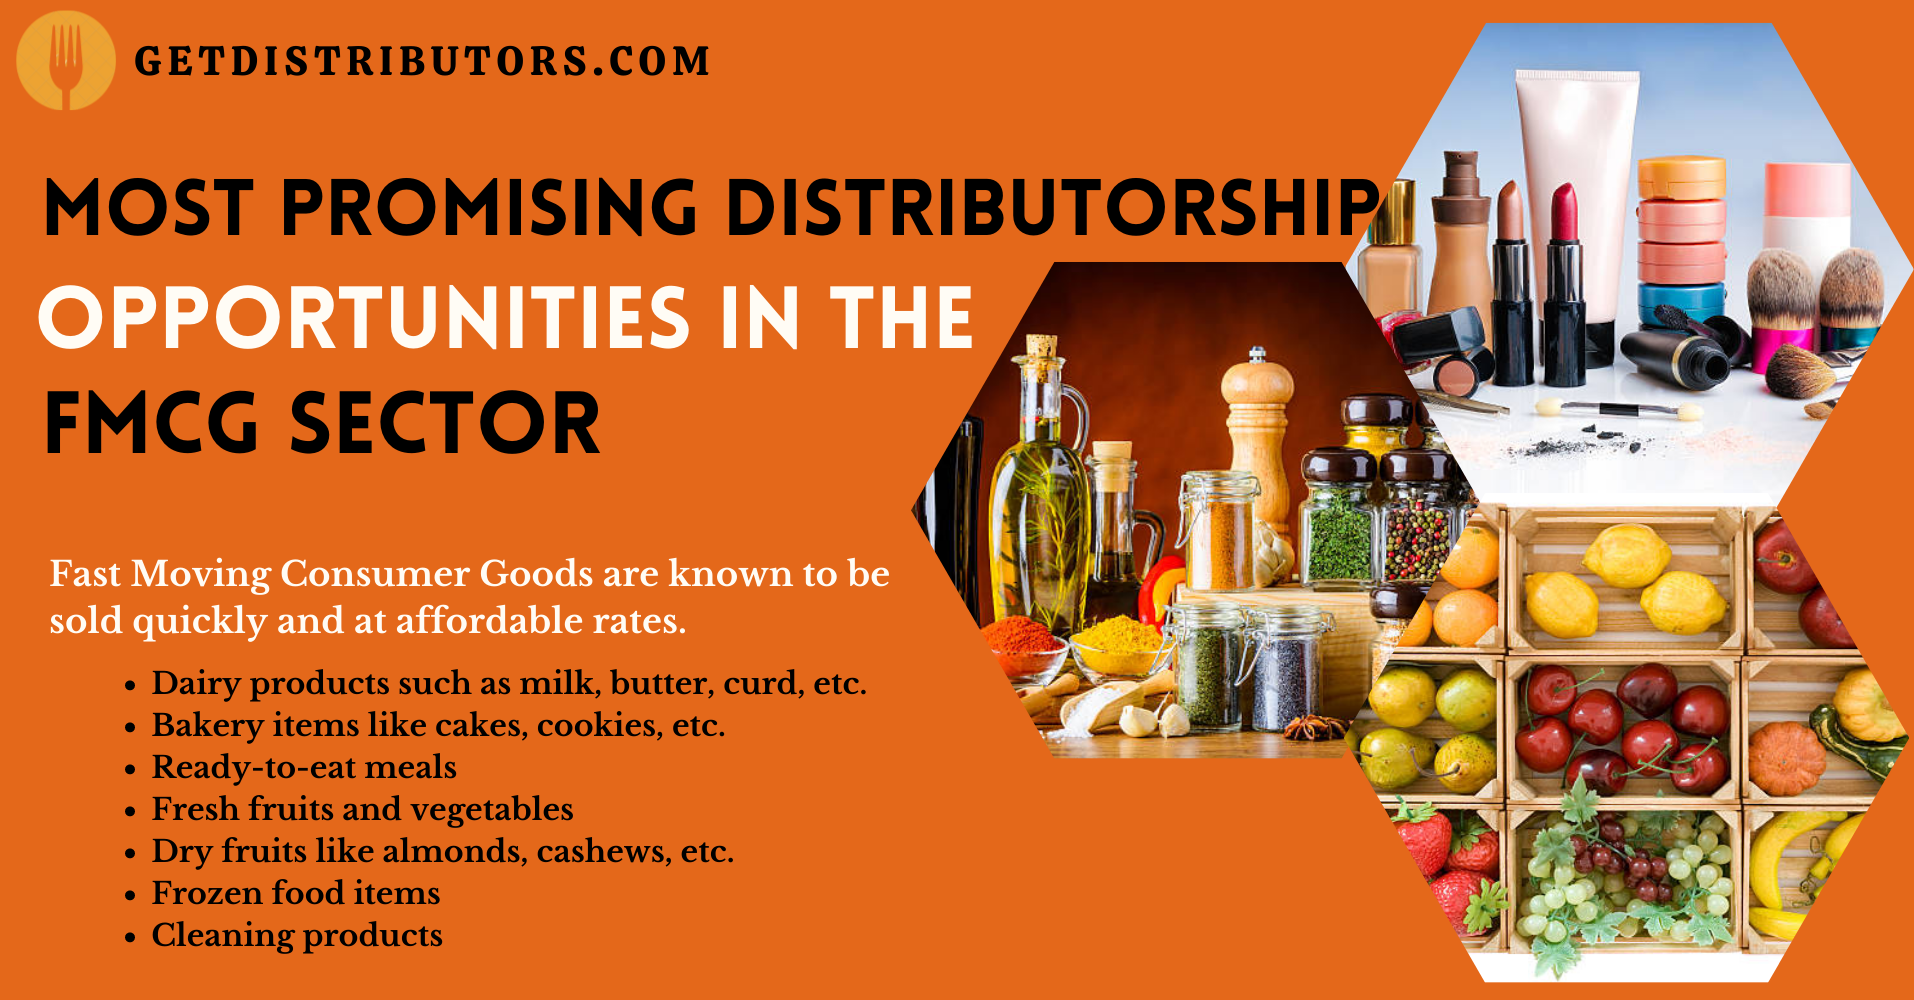 Most promising distributorship opportunities in the FMCG sector